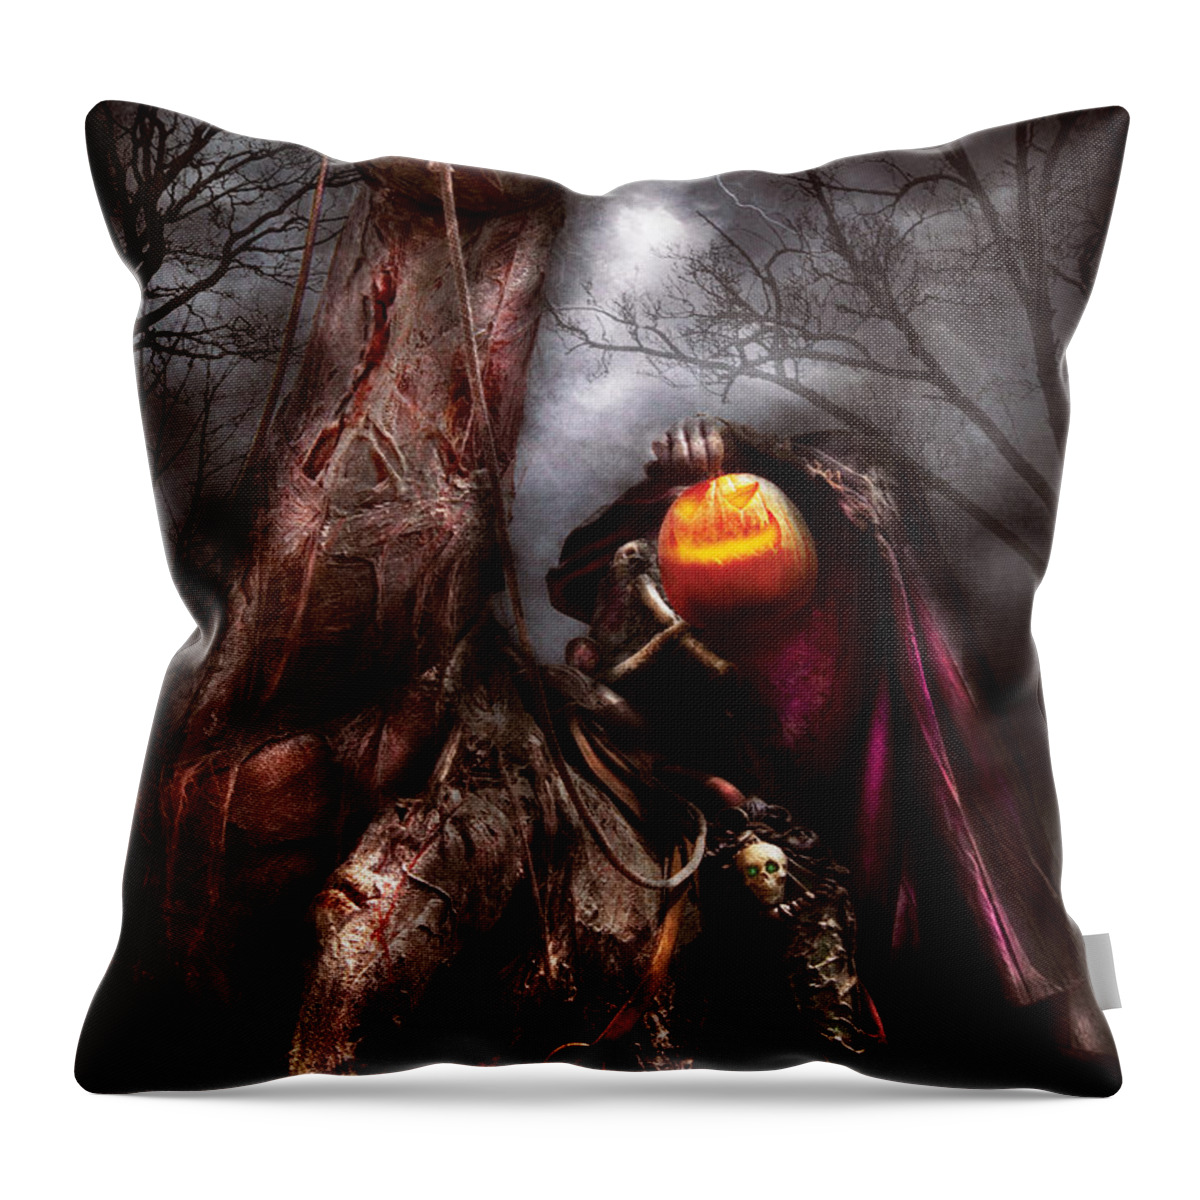 Savad Throw Pillow featuring the photograph Halloween - The Headless Horseman by Mike Savad